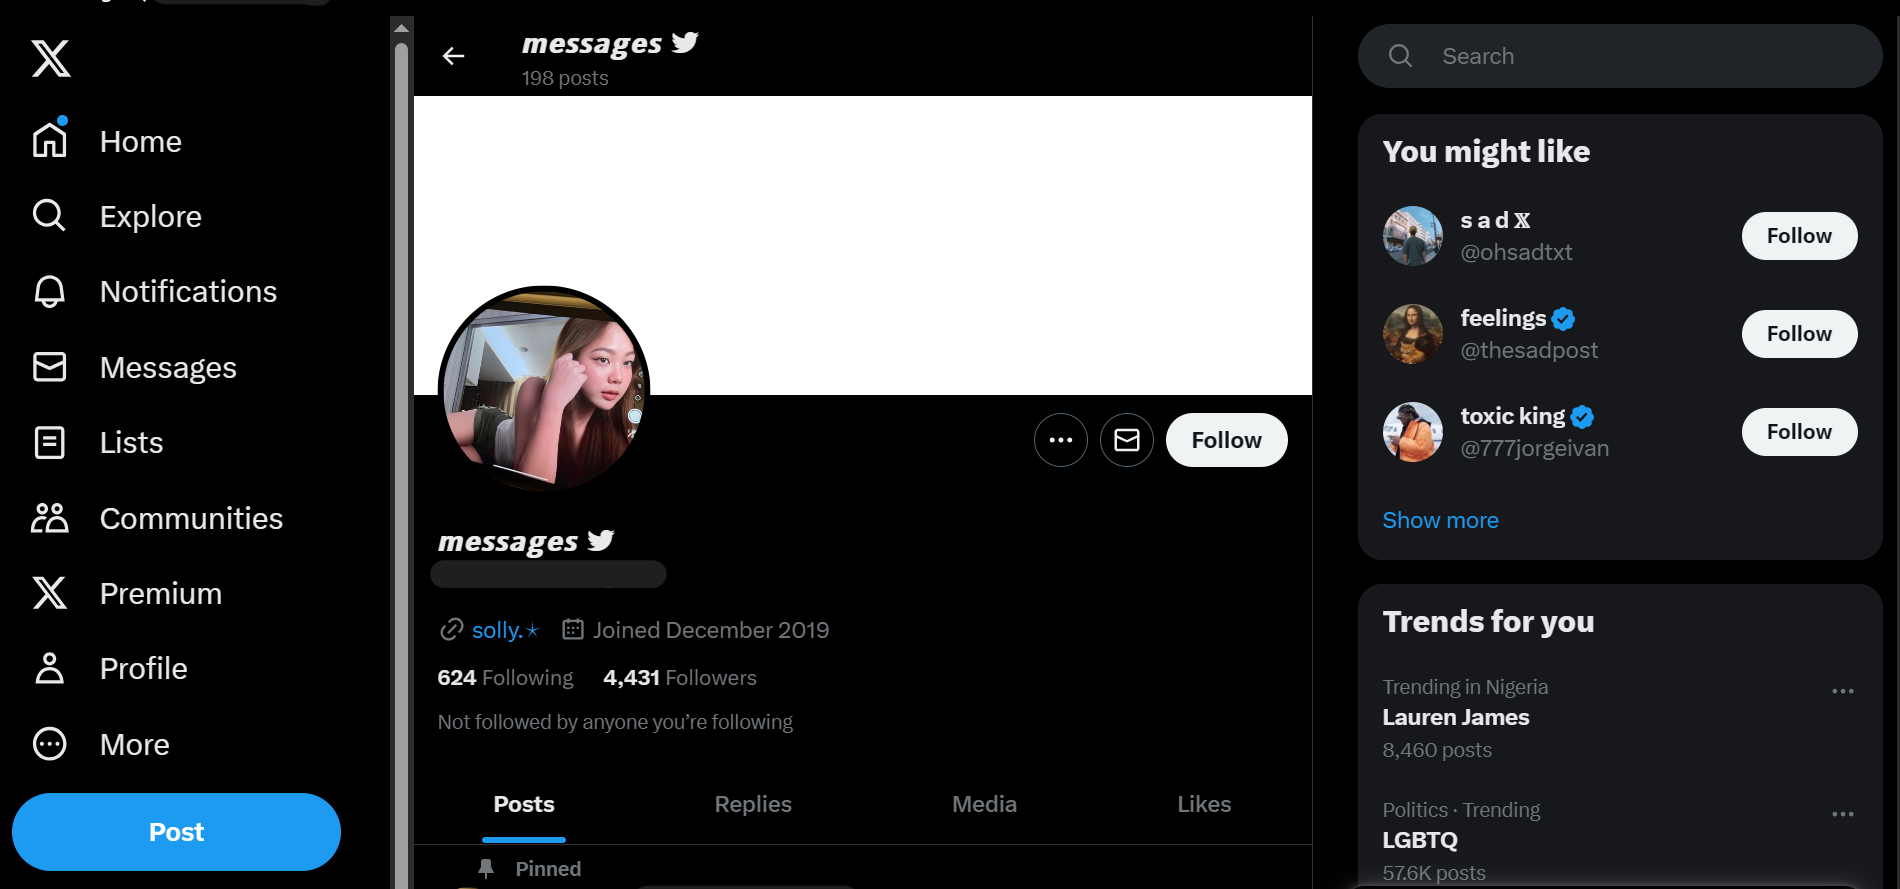 2019 Real 4.4k Followers Twitter (Very Good Engagements & Viral Tweets)